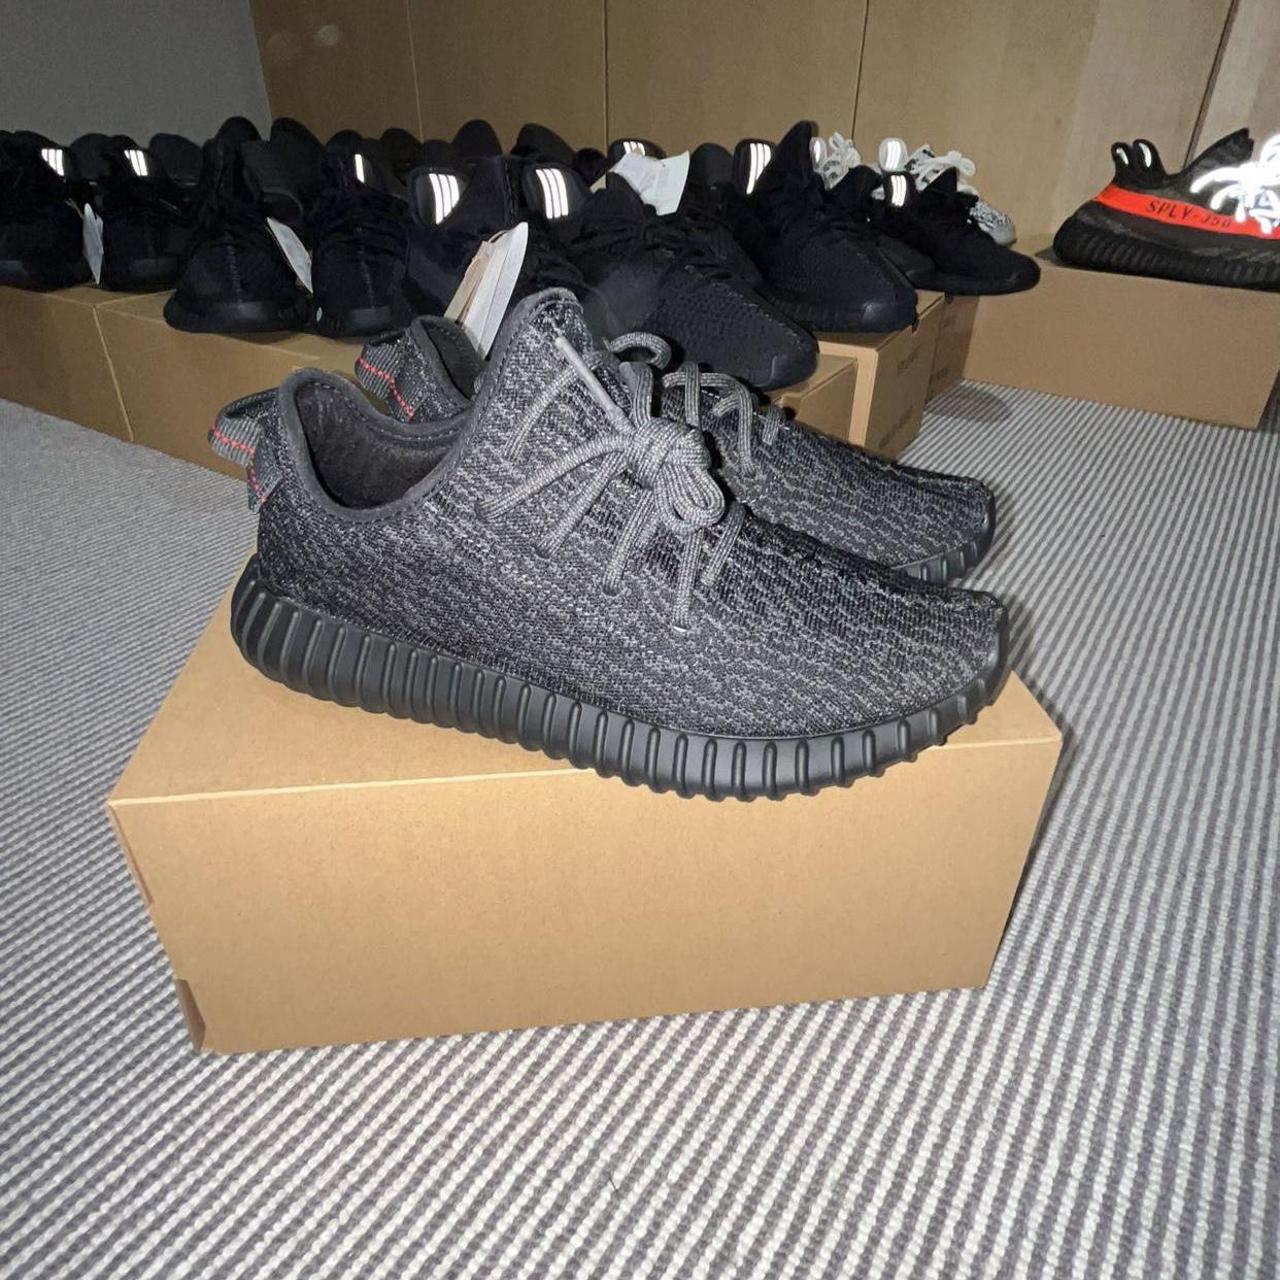 YEEZY 350 PIRATE BLACK - Multiple sizes available -... - Depop